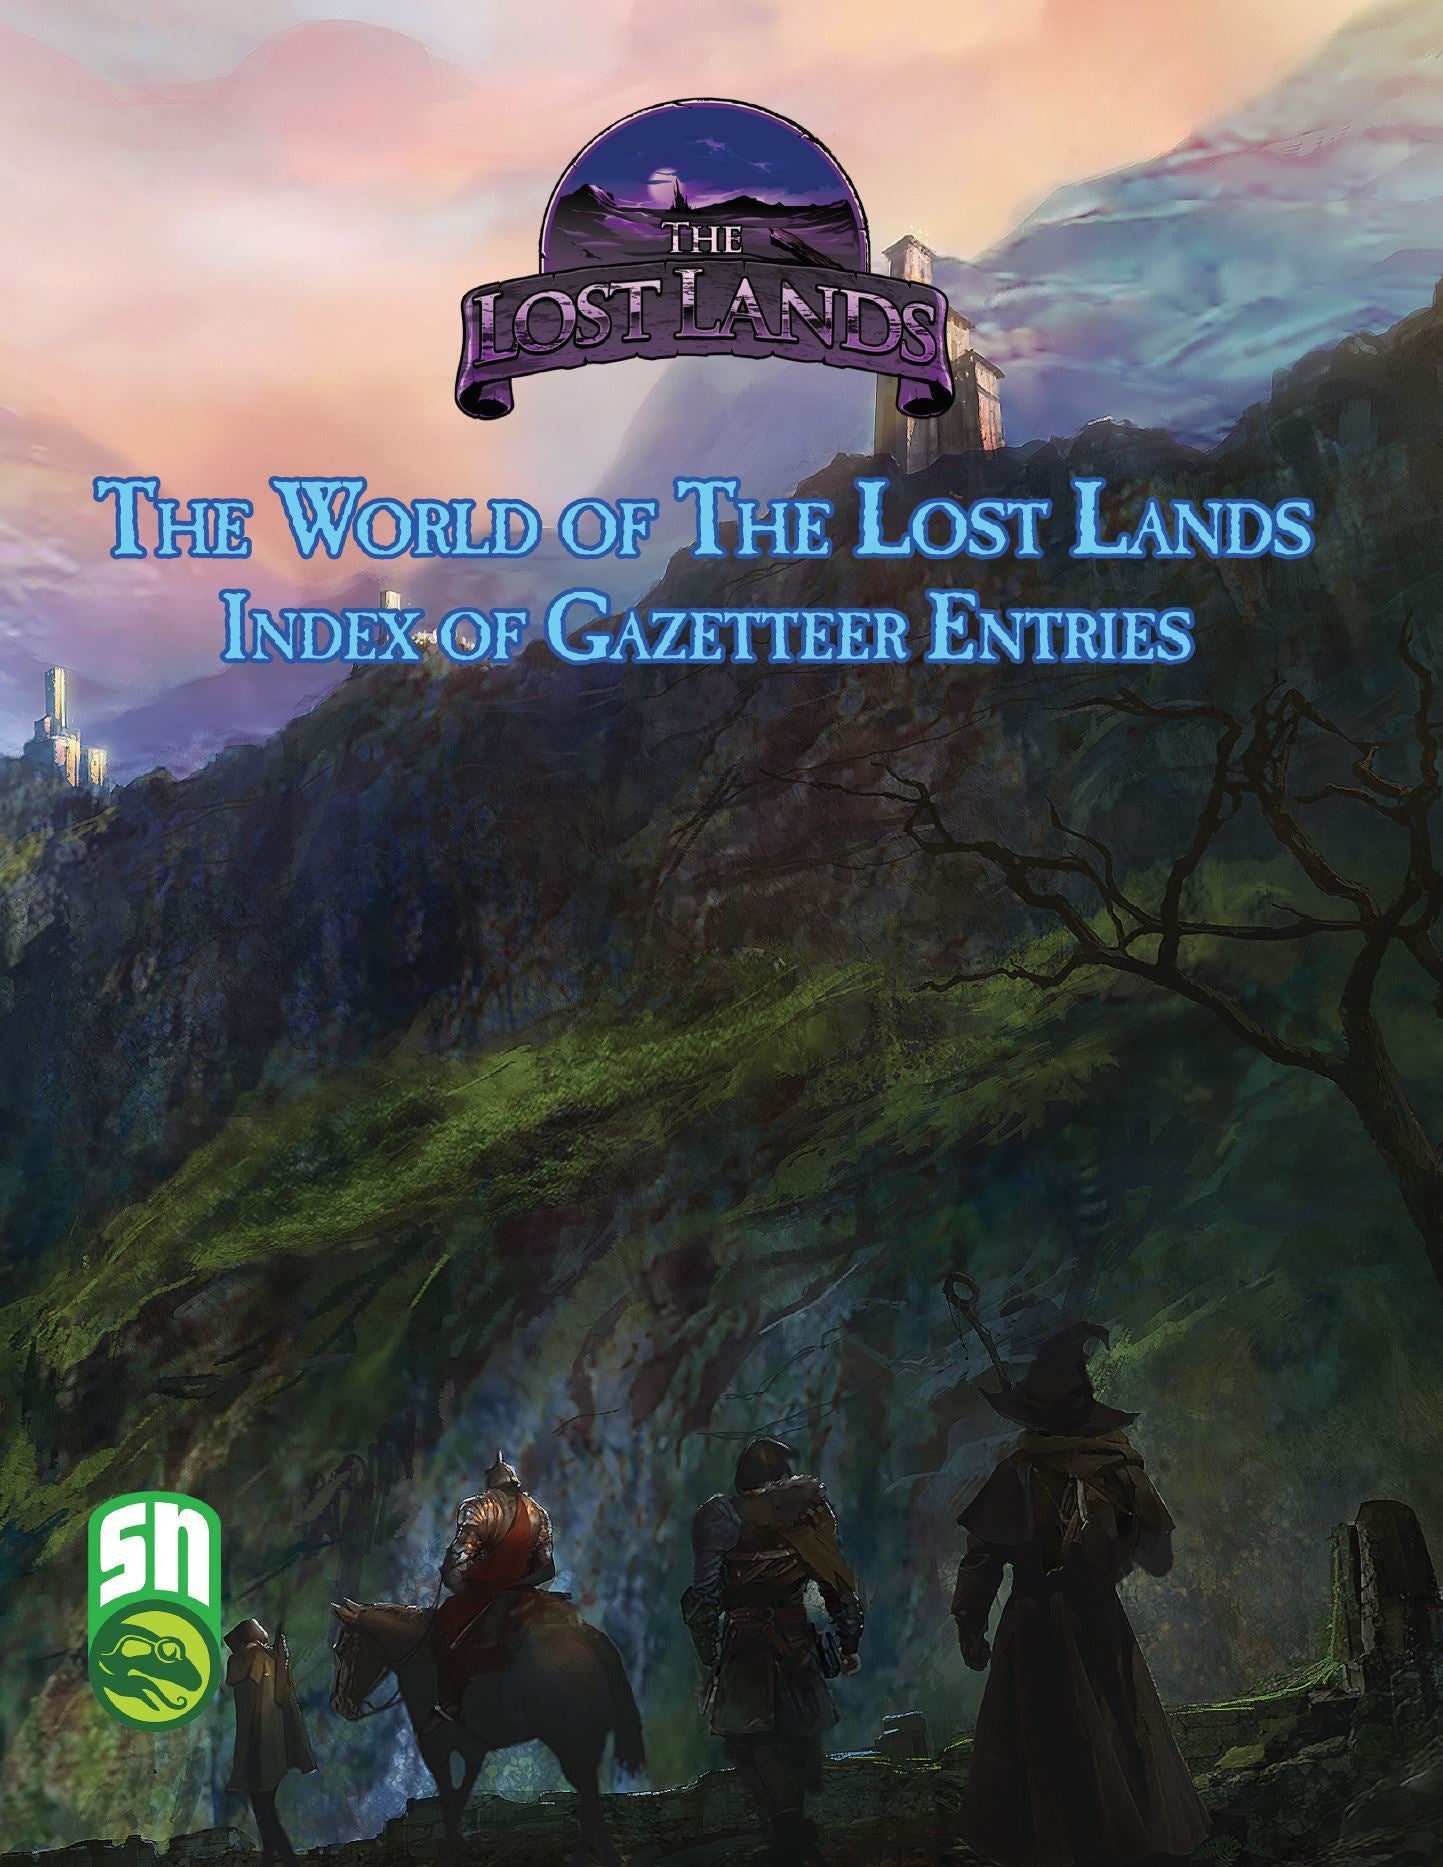 The World of the Lost Lands Index of Gazetteer Entries